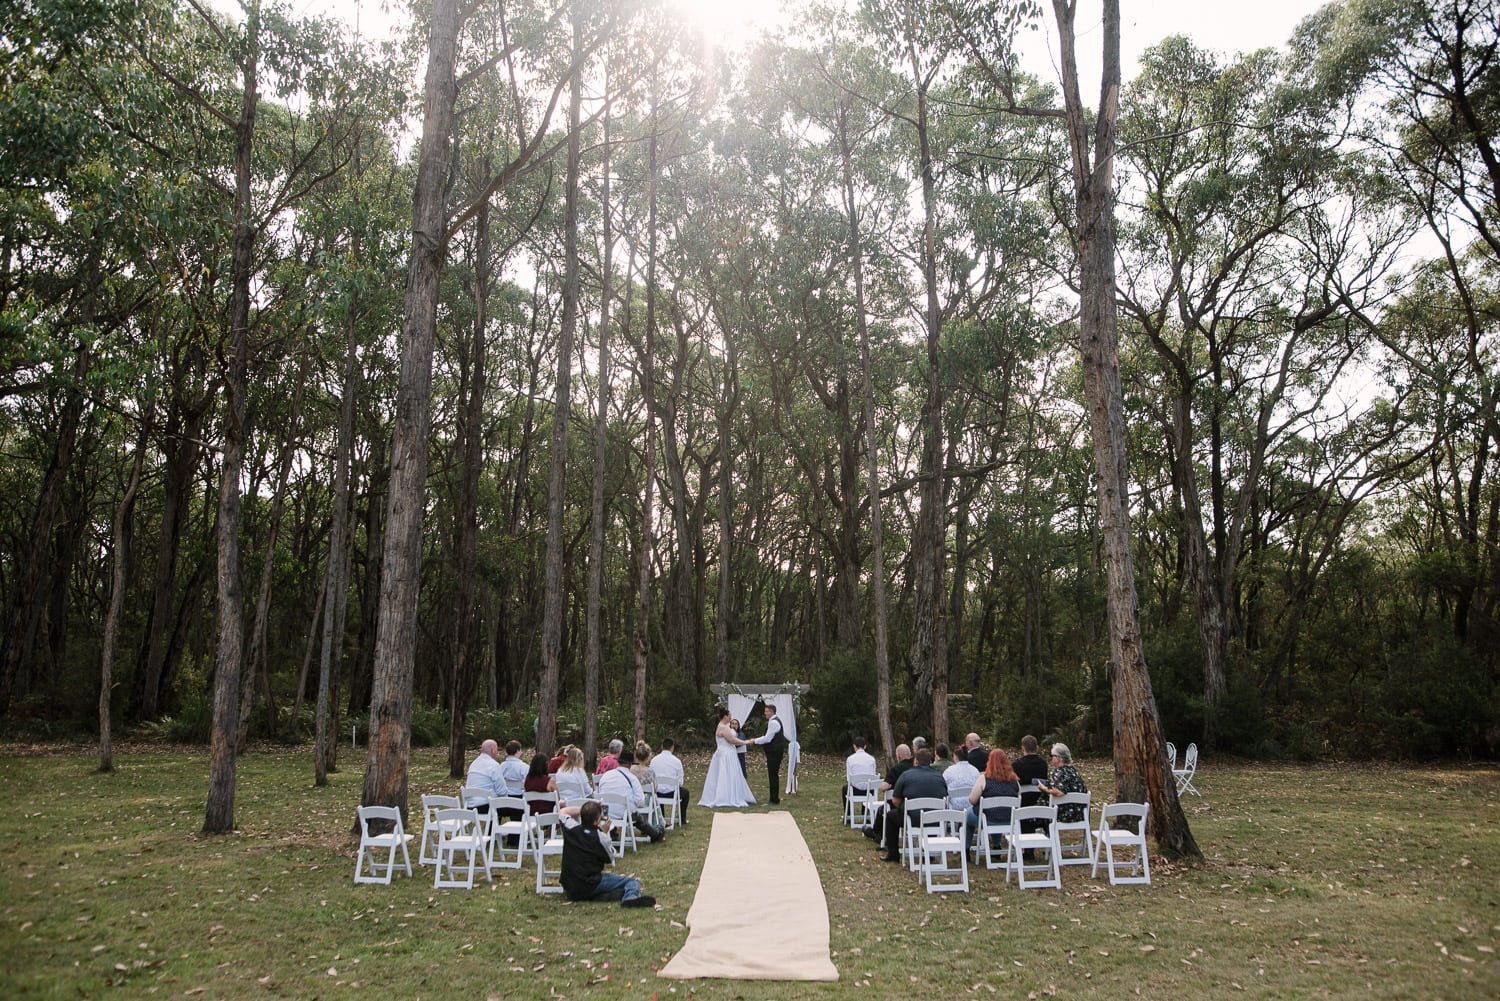 Wedding ceremony at Colac Scout camp site in the Otways